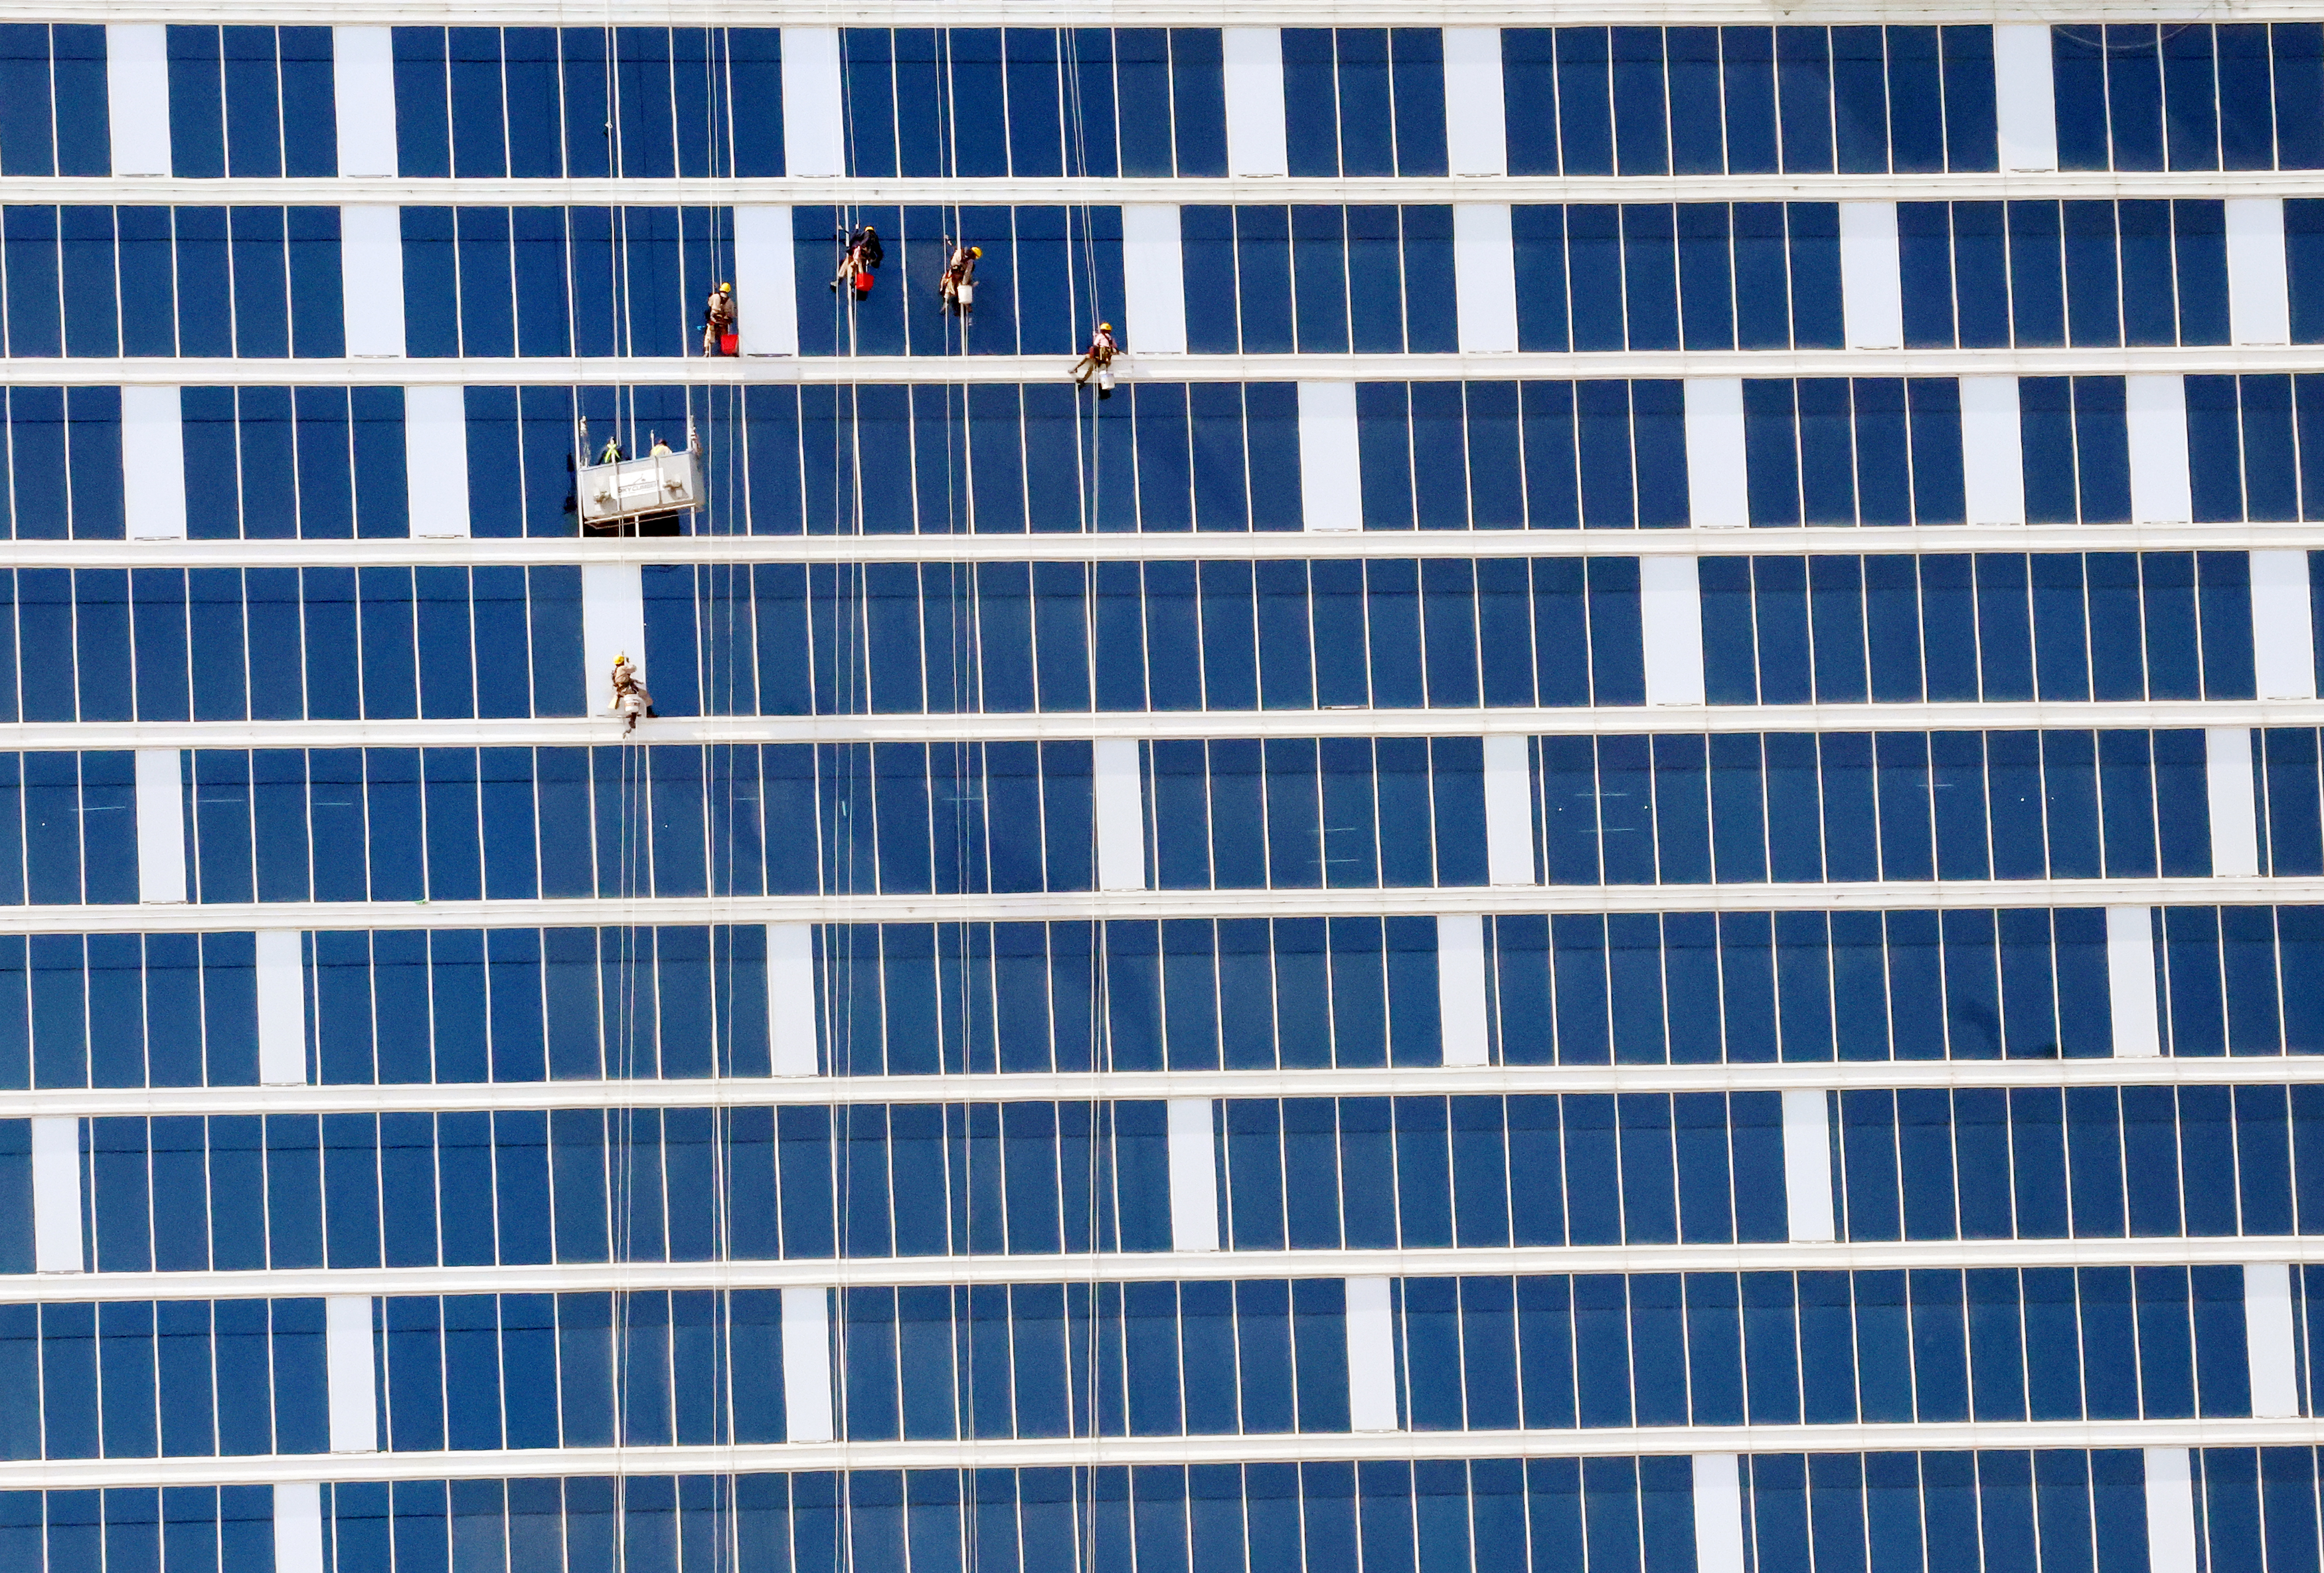 Workers clean the window panels of a building in Kuwait City on February 22, 2023.